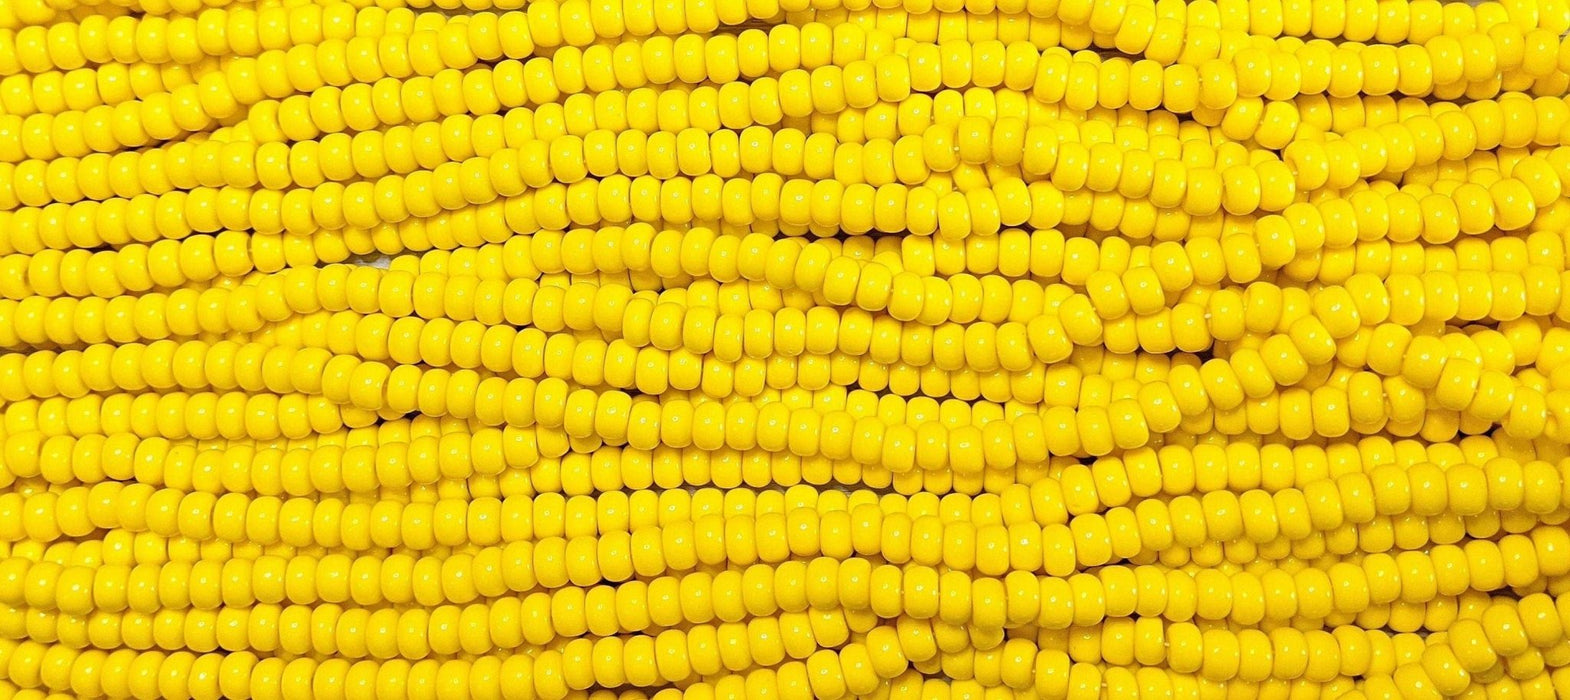 1/0 Opaque Light Yellow Czech Glass Seed Beads - 20 Inch Strand (1BW304) - Beads and Babble